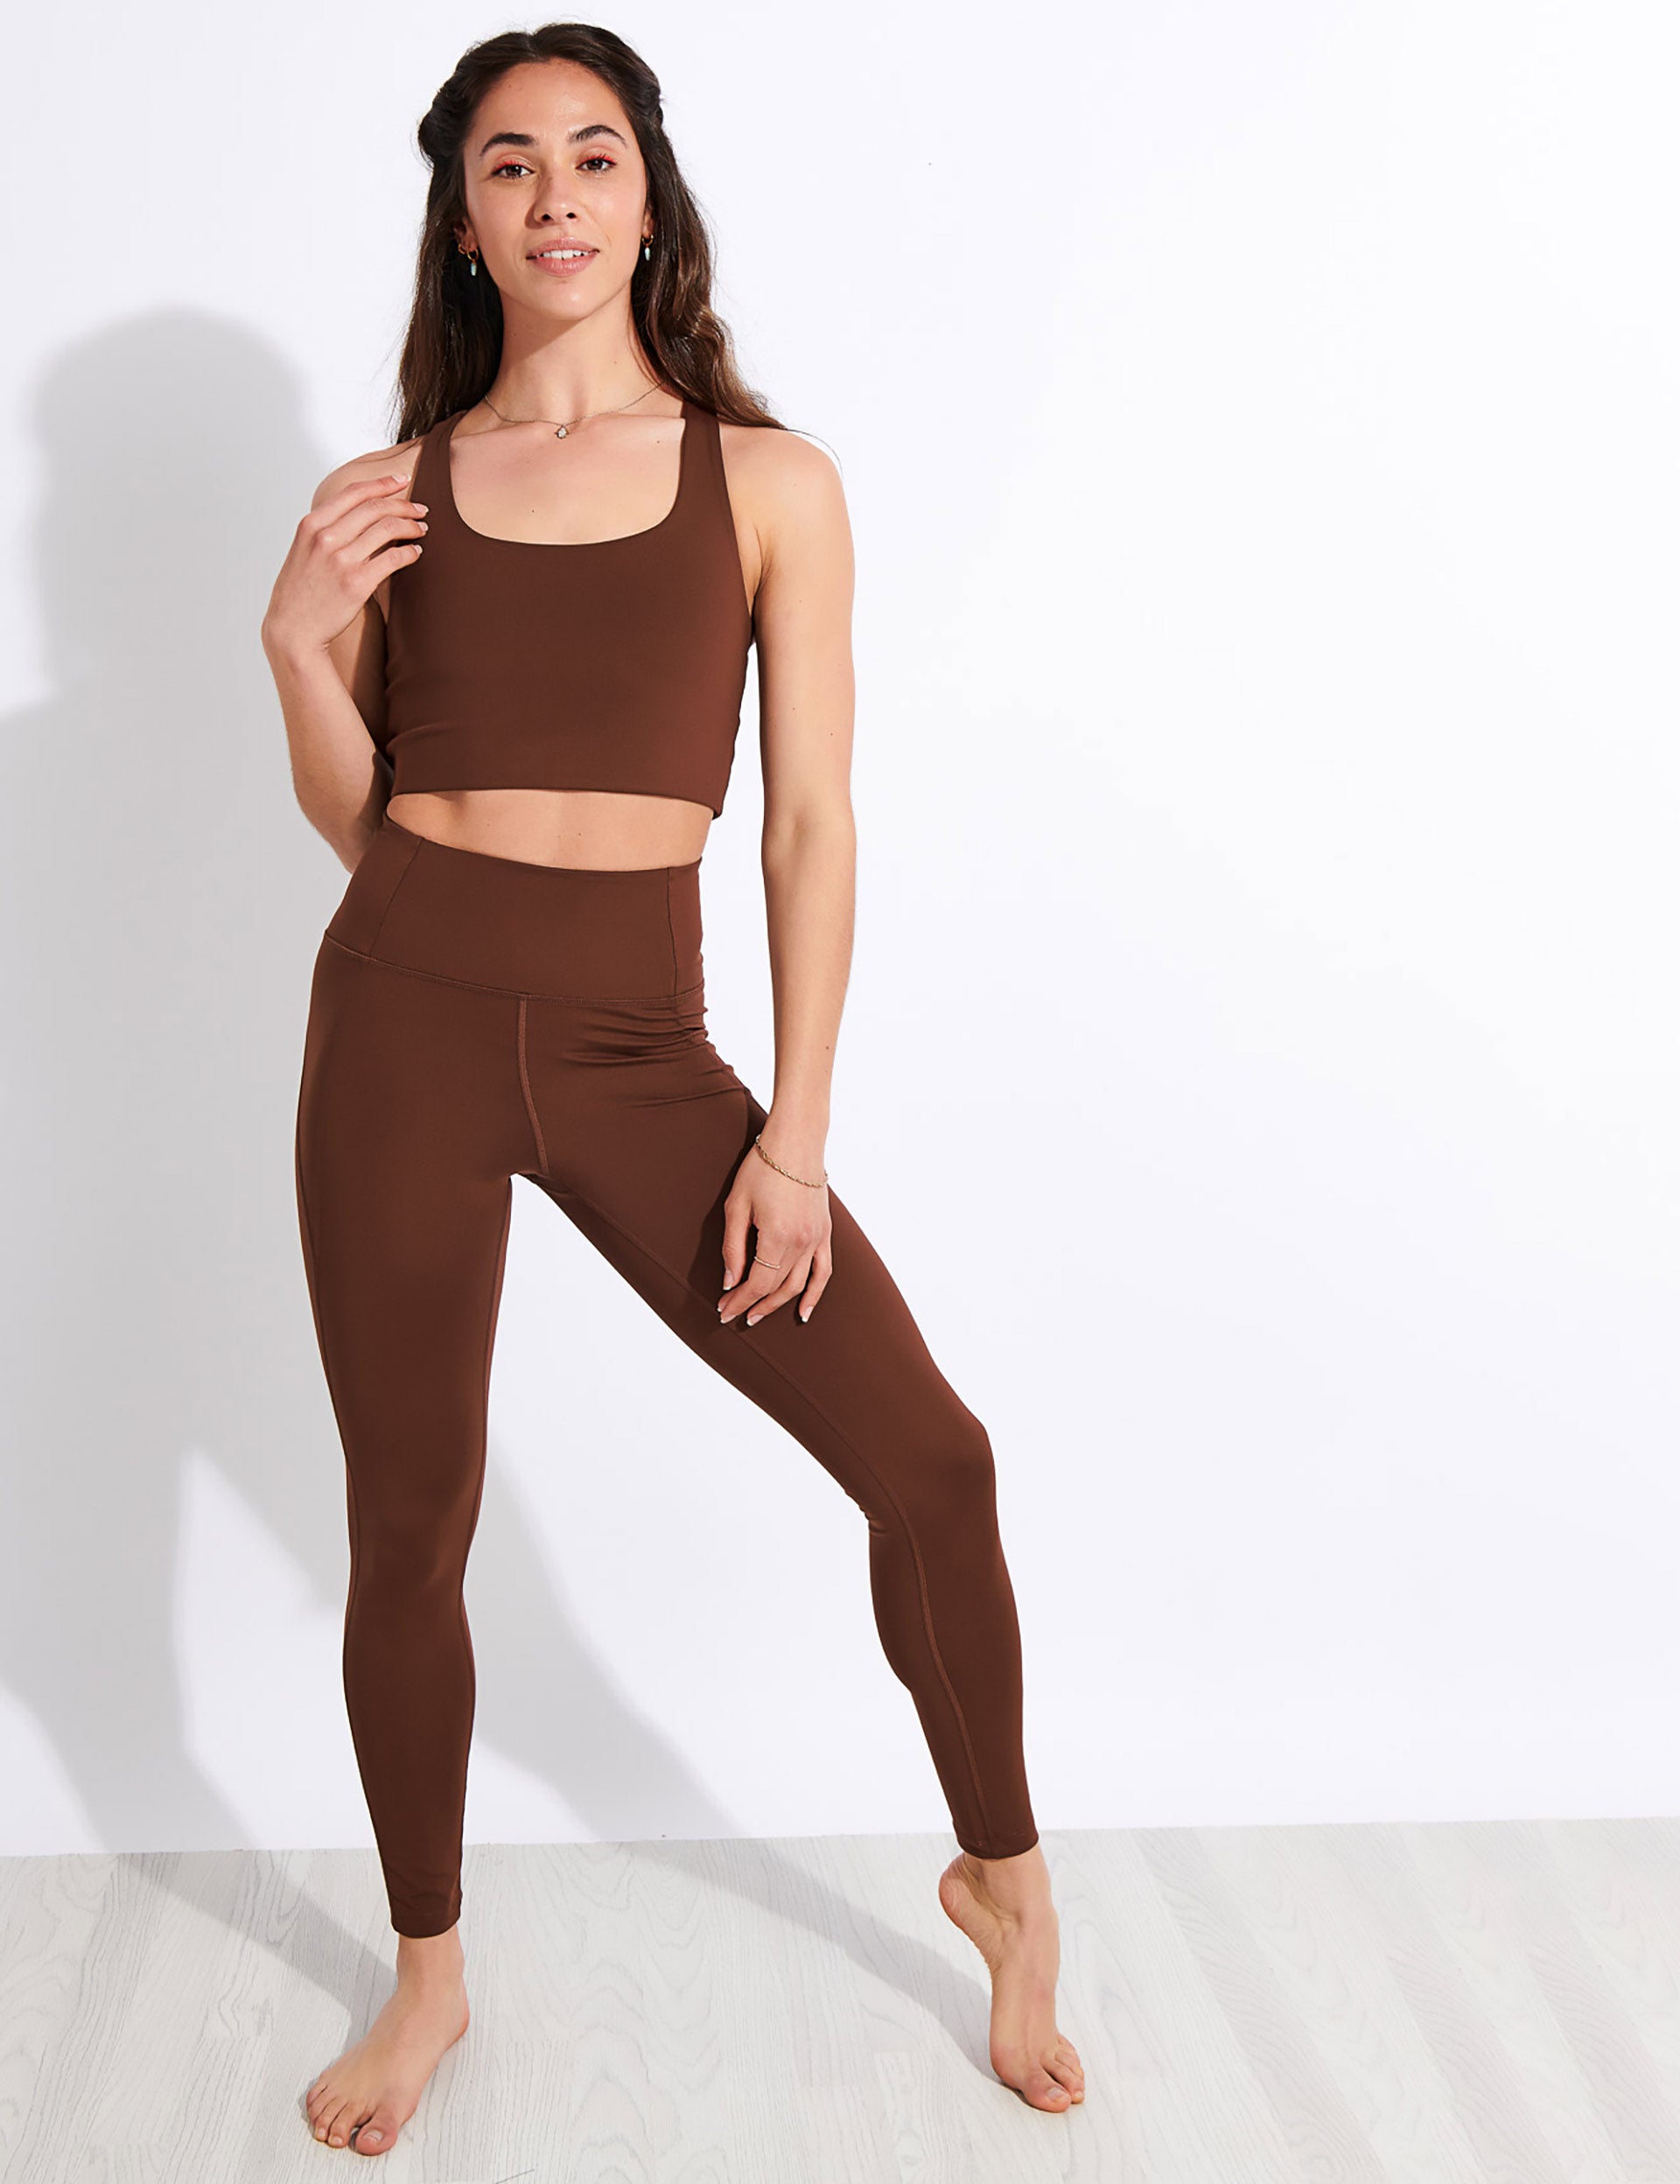 Girlfriend Collective Full Length Compressive High-Rise Legging - Earth